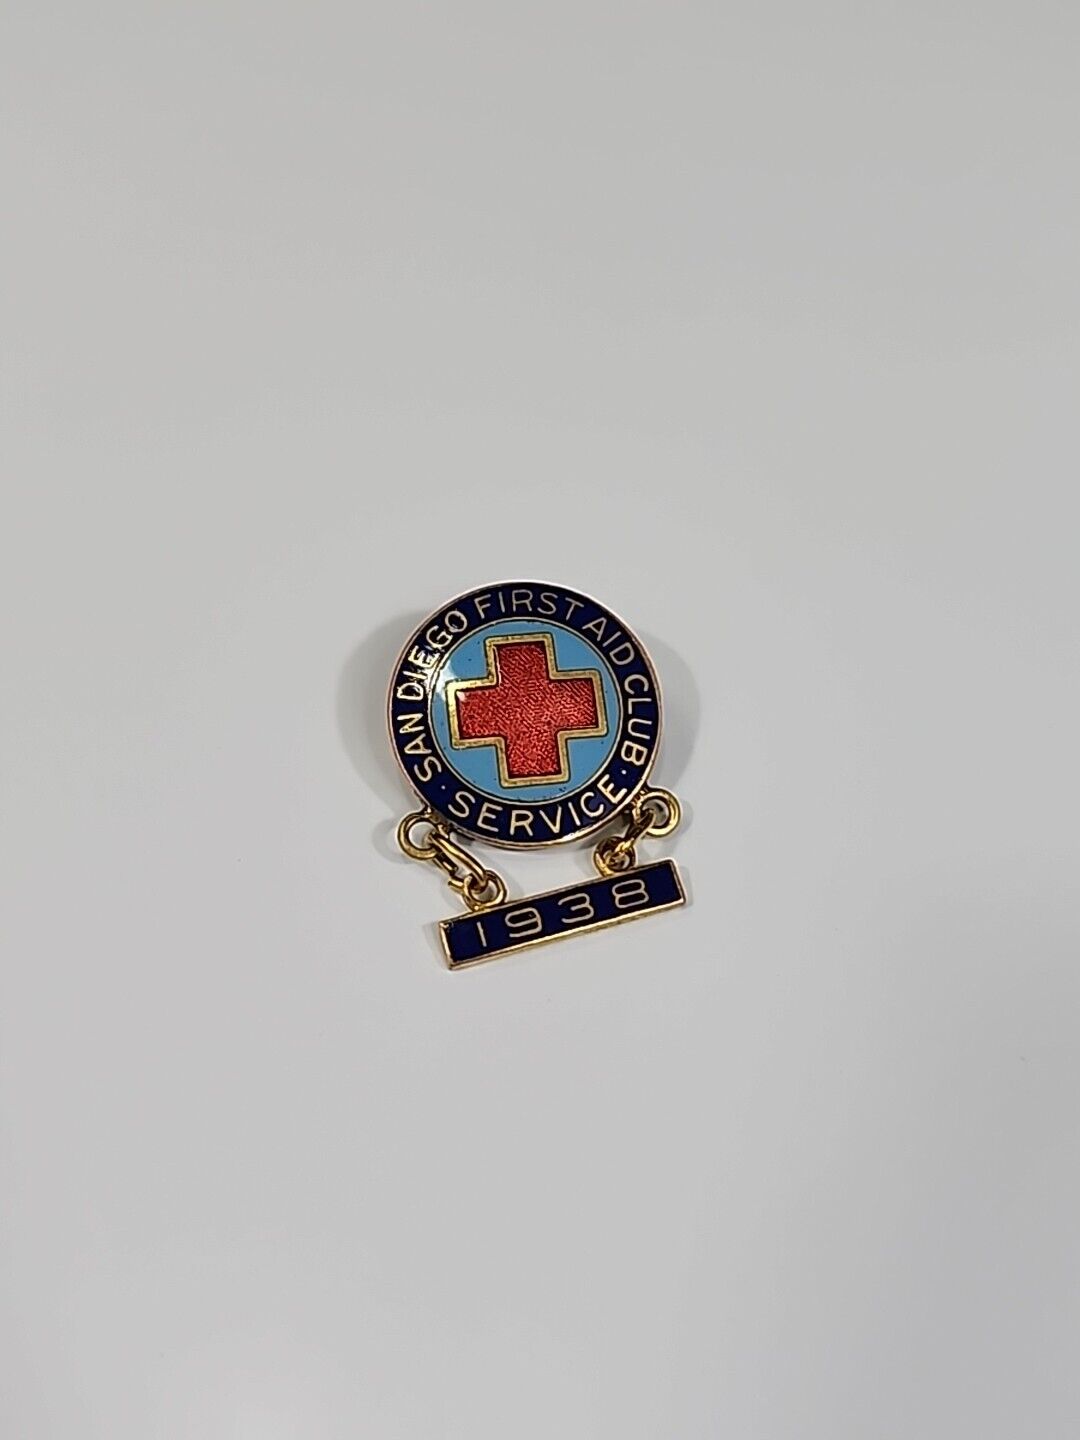 San Diego First Aid Club Service Lapel Pin Dangling Date 1938 Vintage